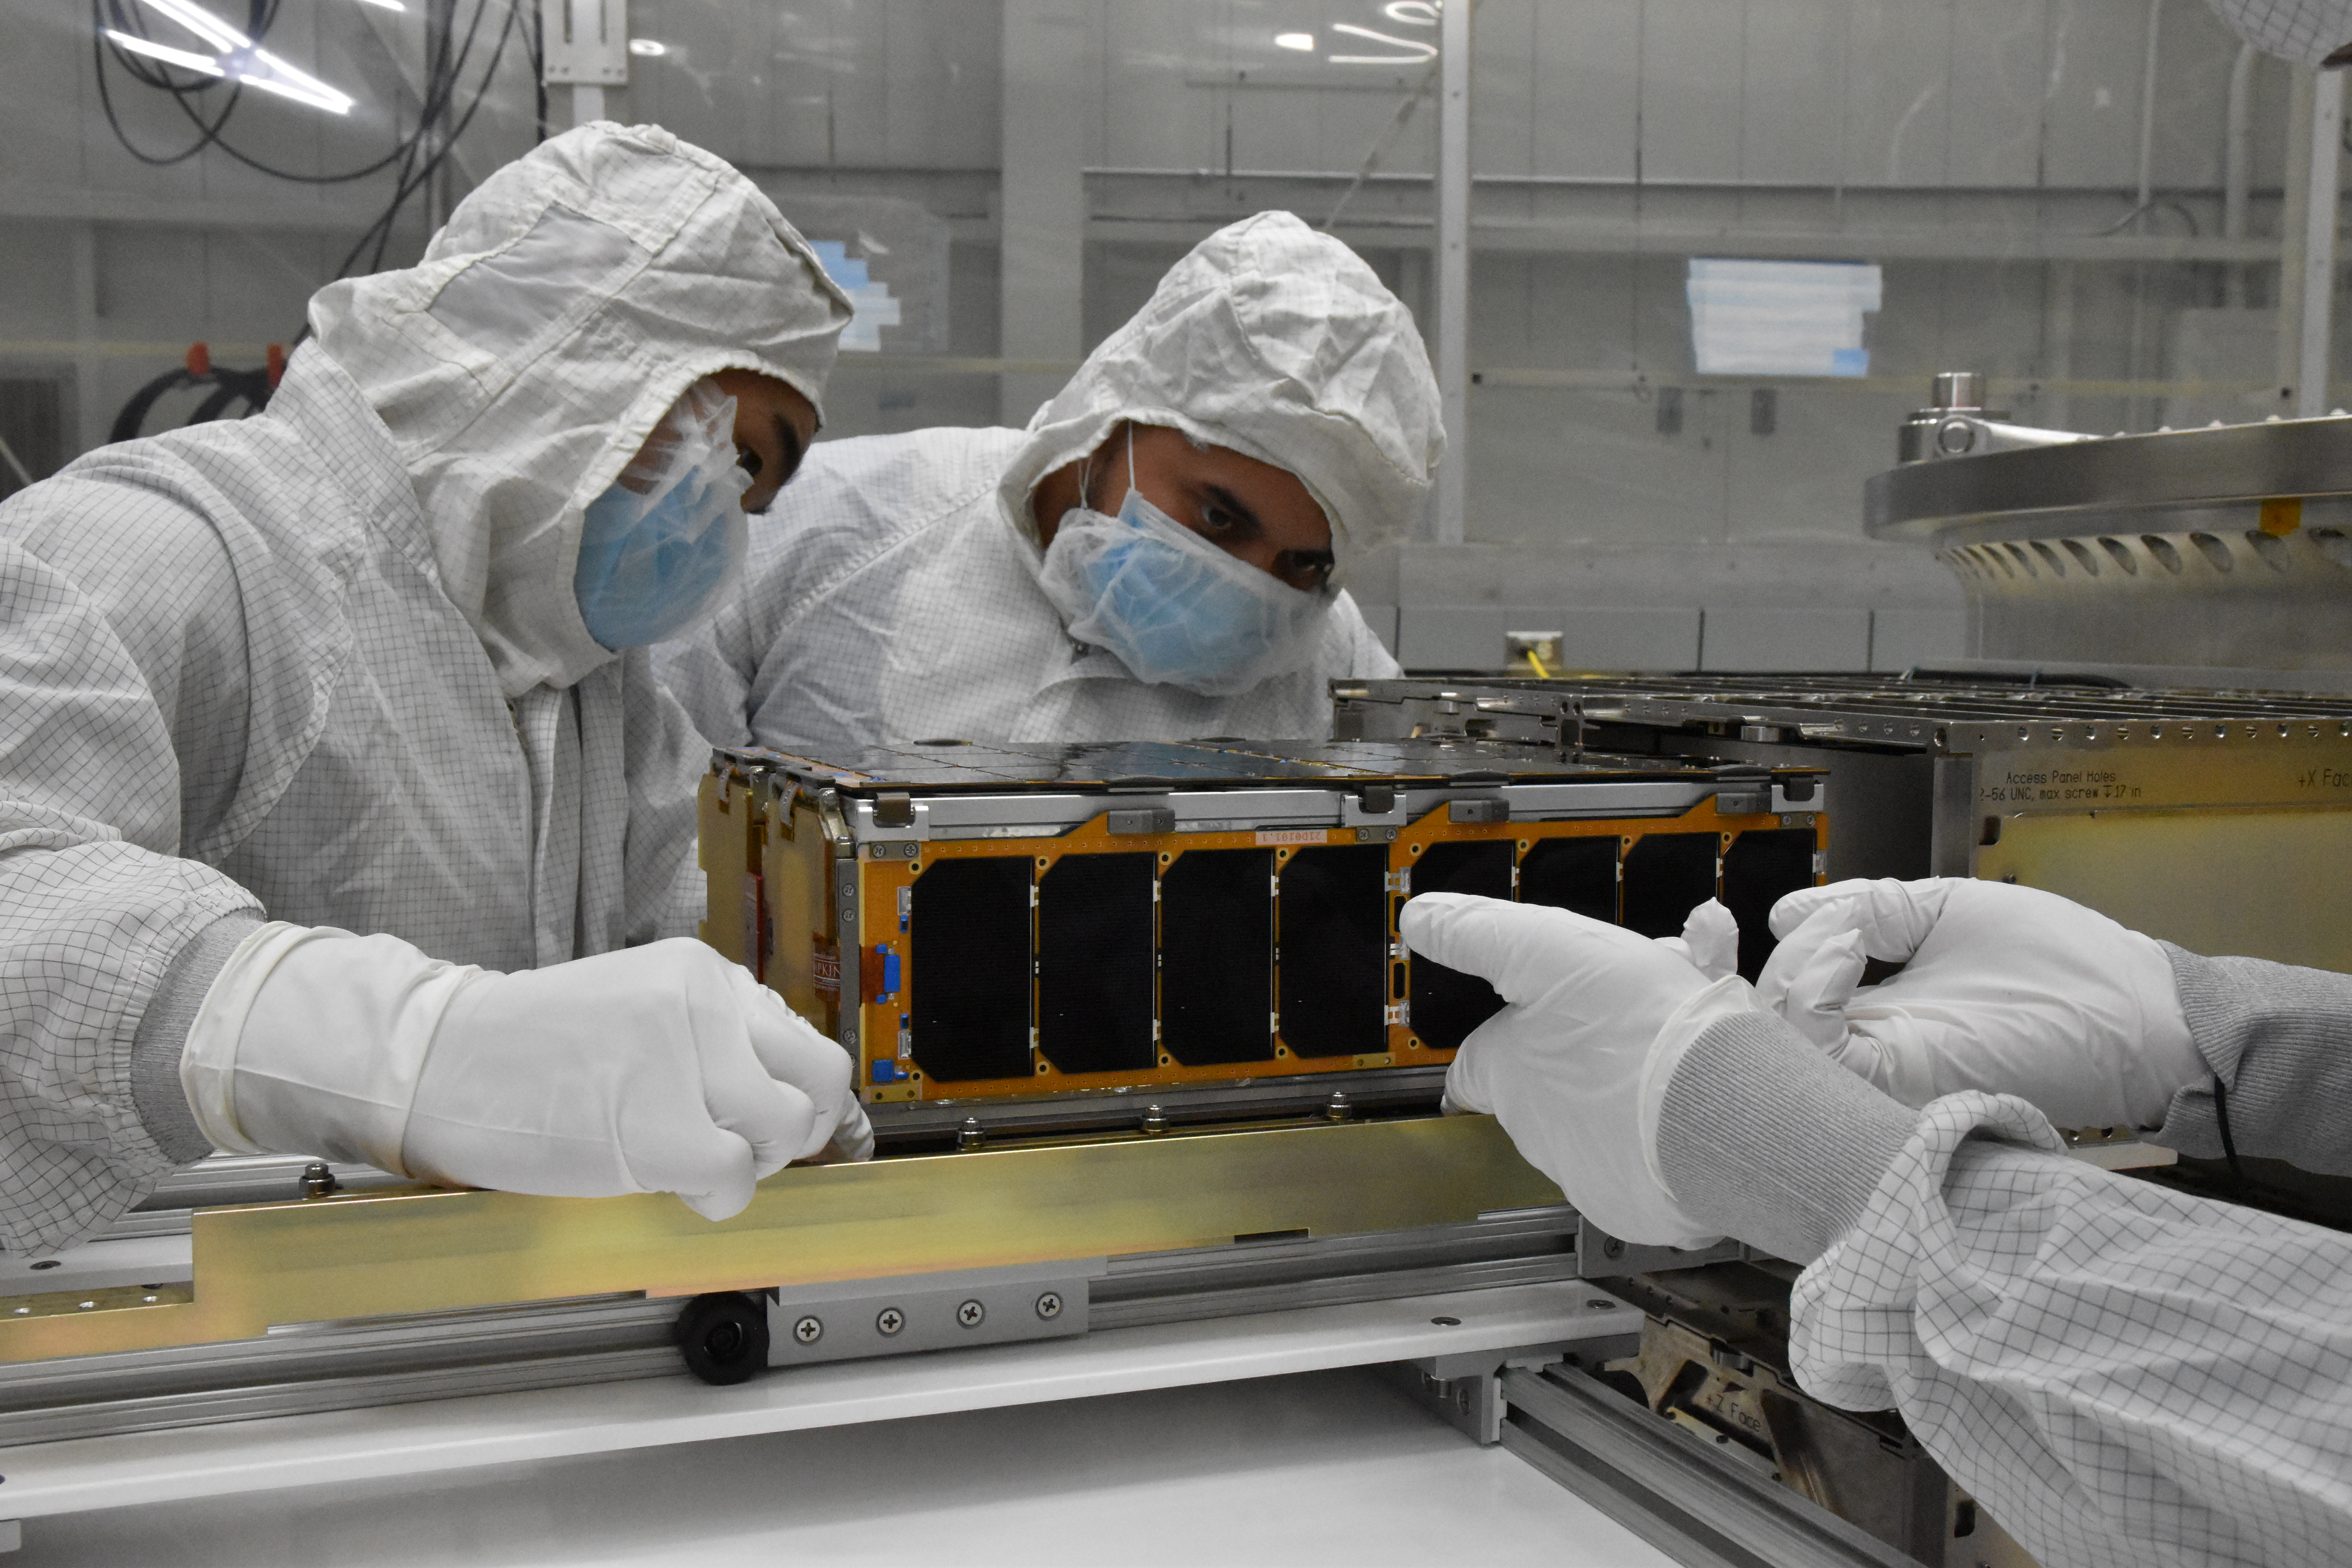 CesiumAstro employees load an active phased array system into a payload dispenser.